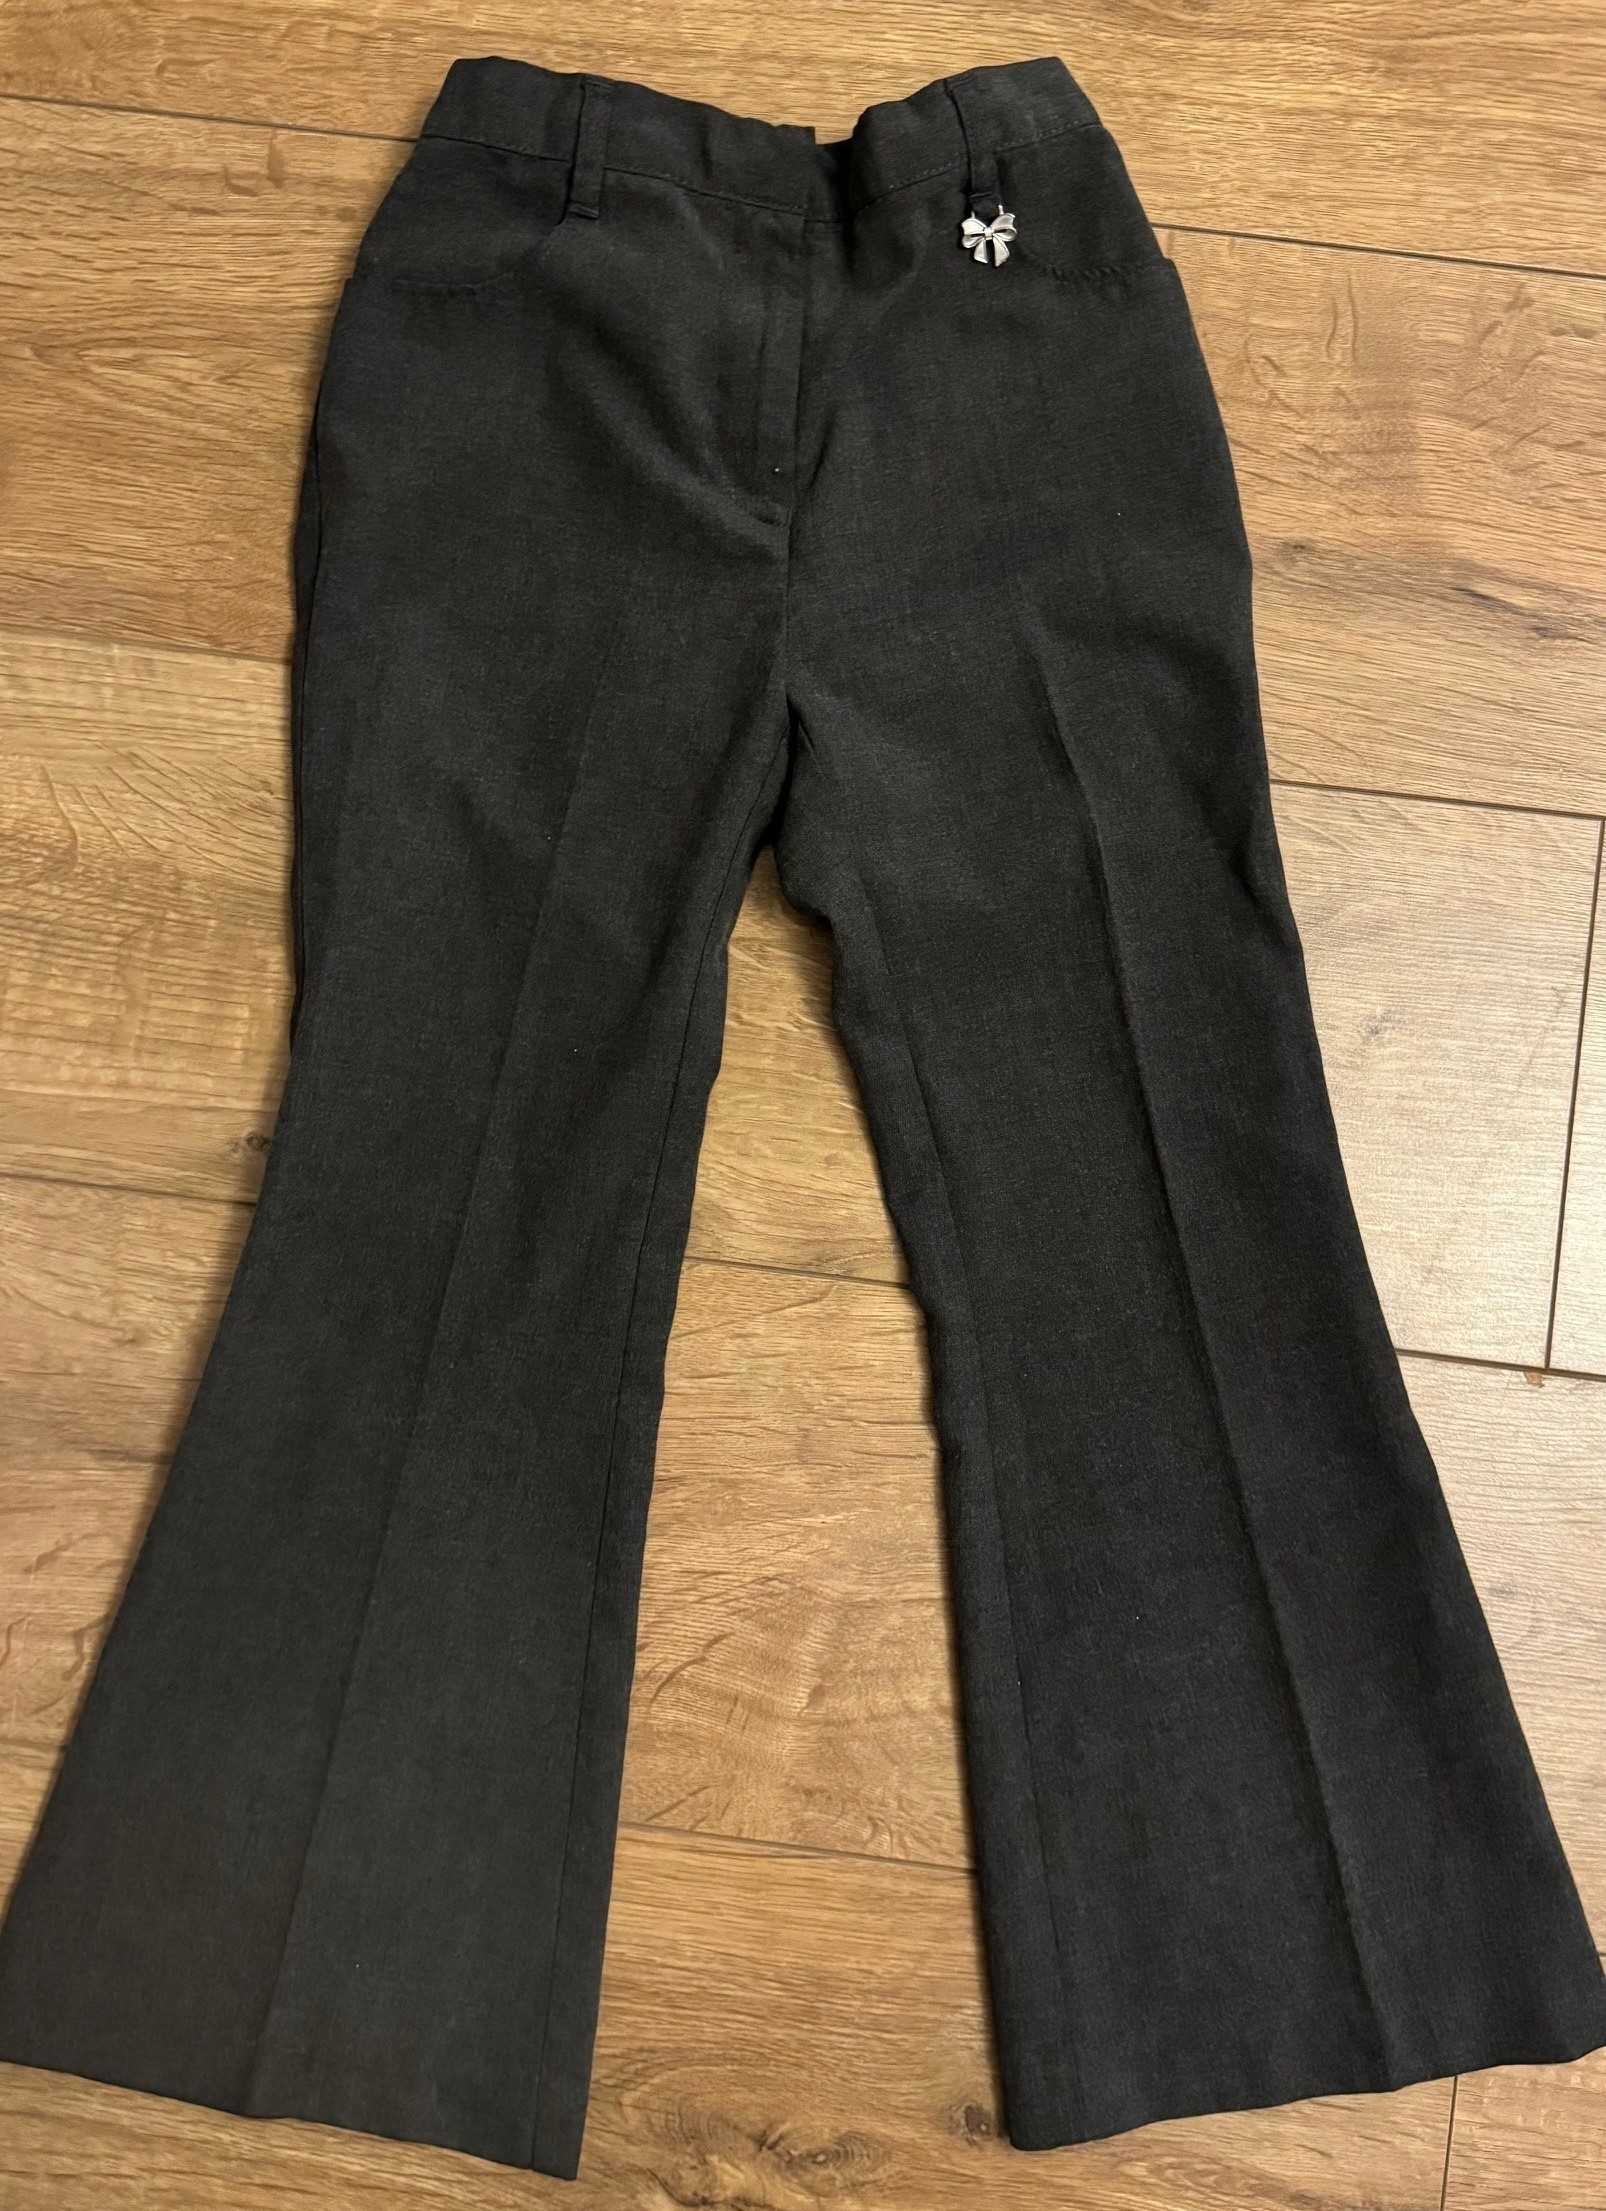 Trousers (with bows or charms) 6-7 yrs